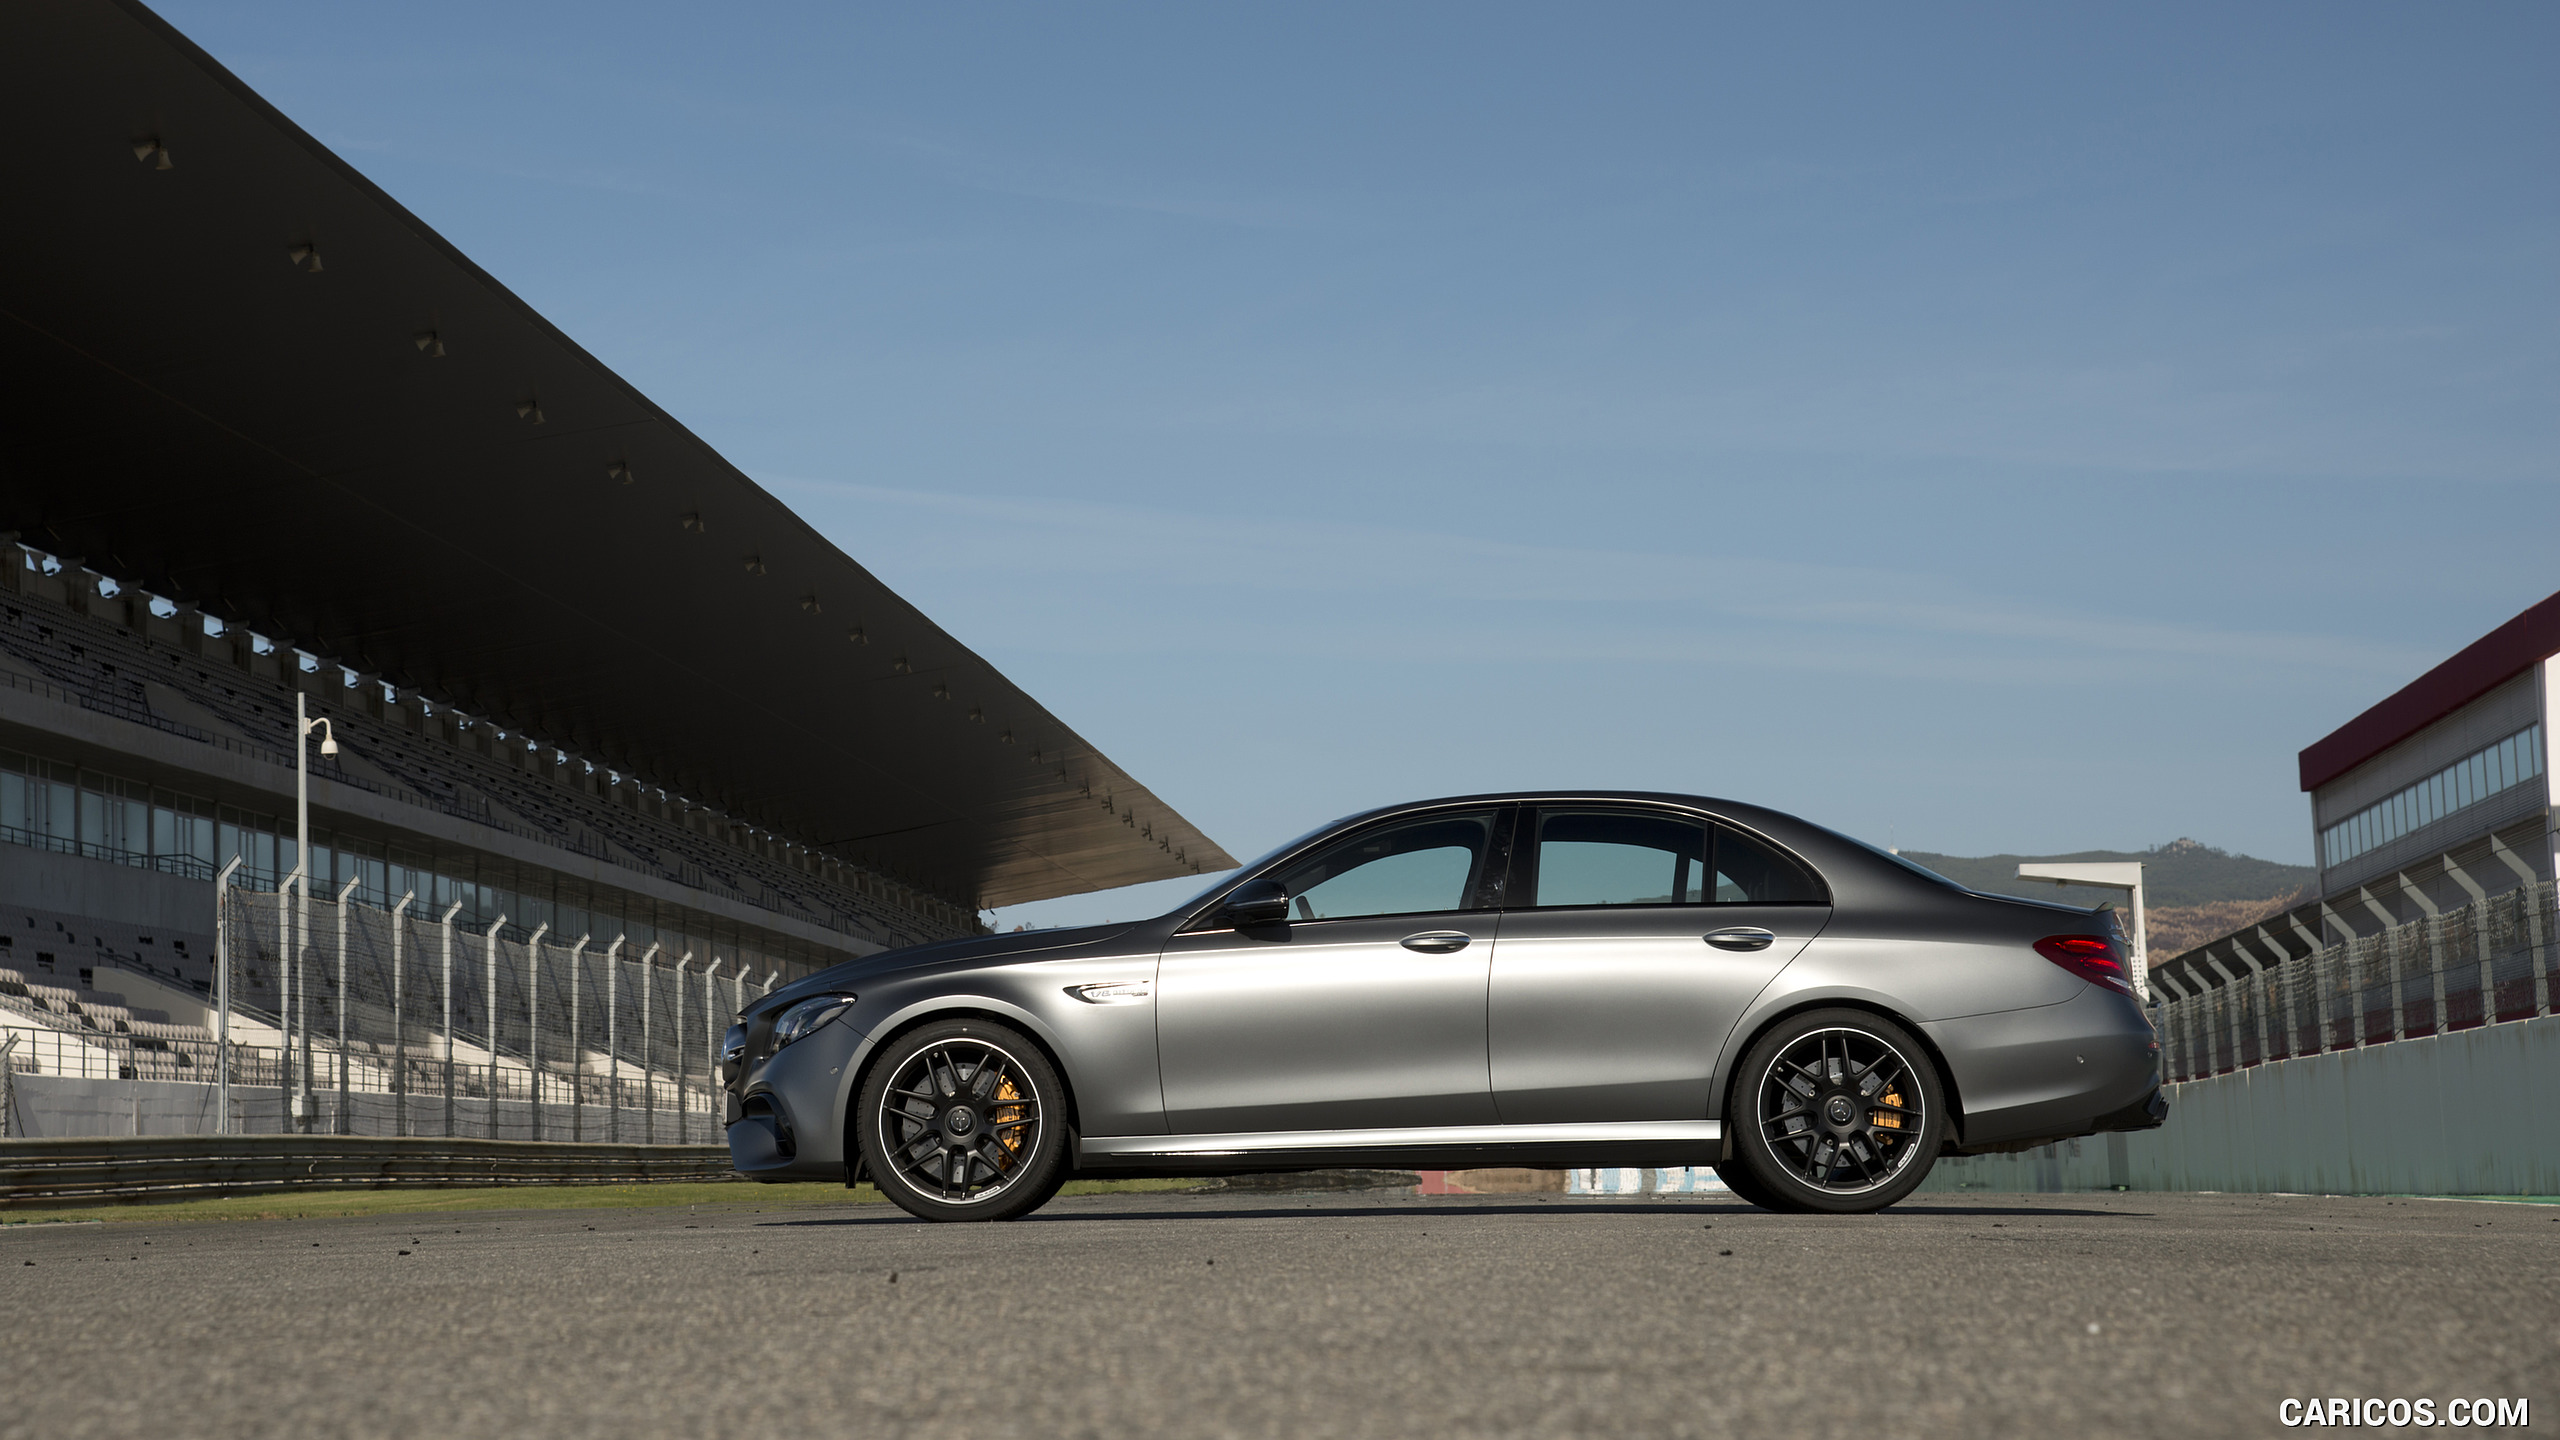 2018 Mercedes-AMG E63 S 4MATIC+ - Side, #285 of 323